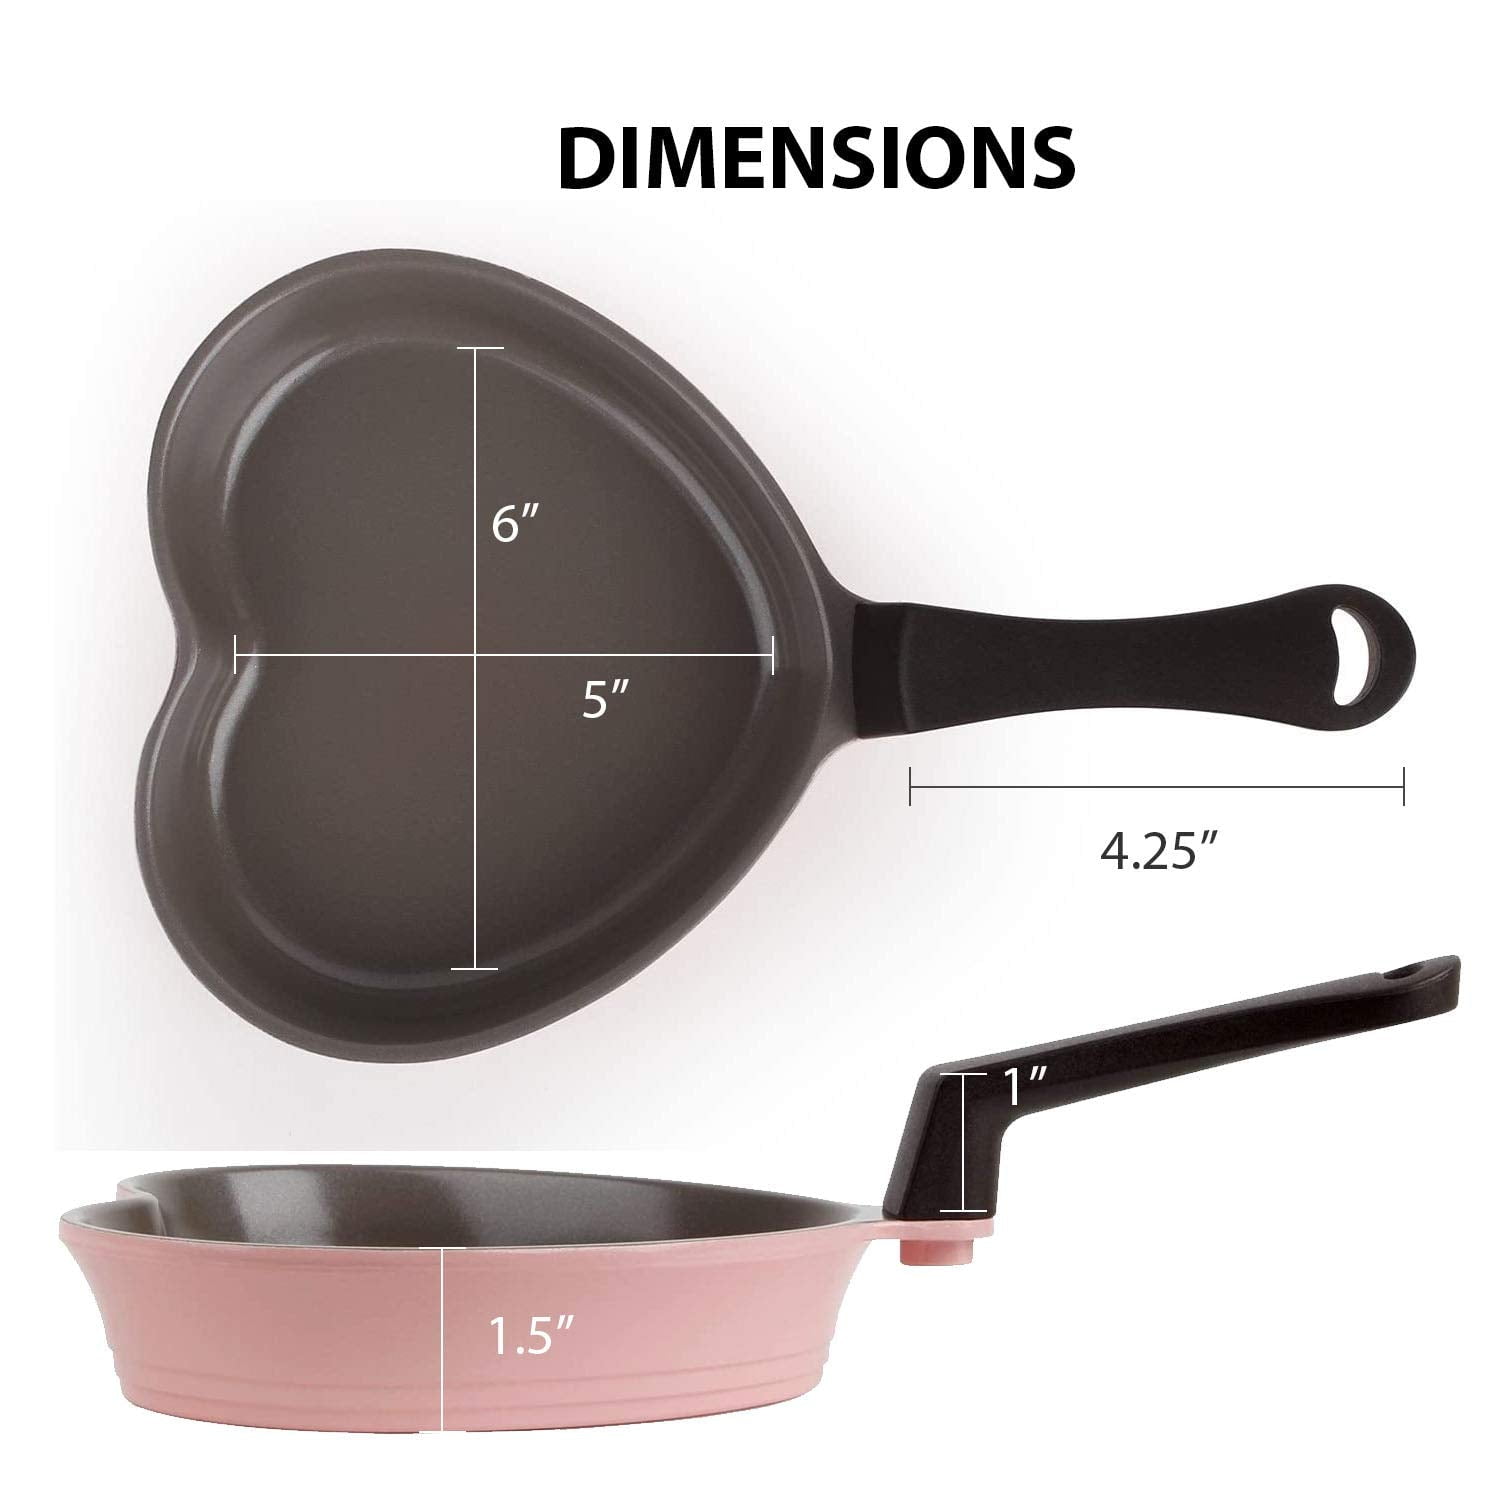 Mini Love Frying Pan Supplement Cooking Pot Ceramic Non-stick Pink  Heart-shaped Small Wok